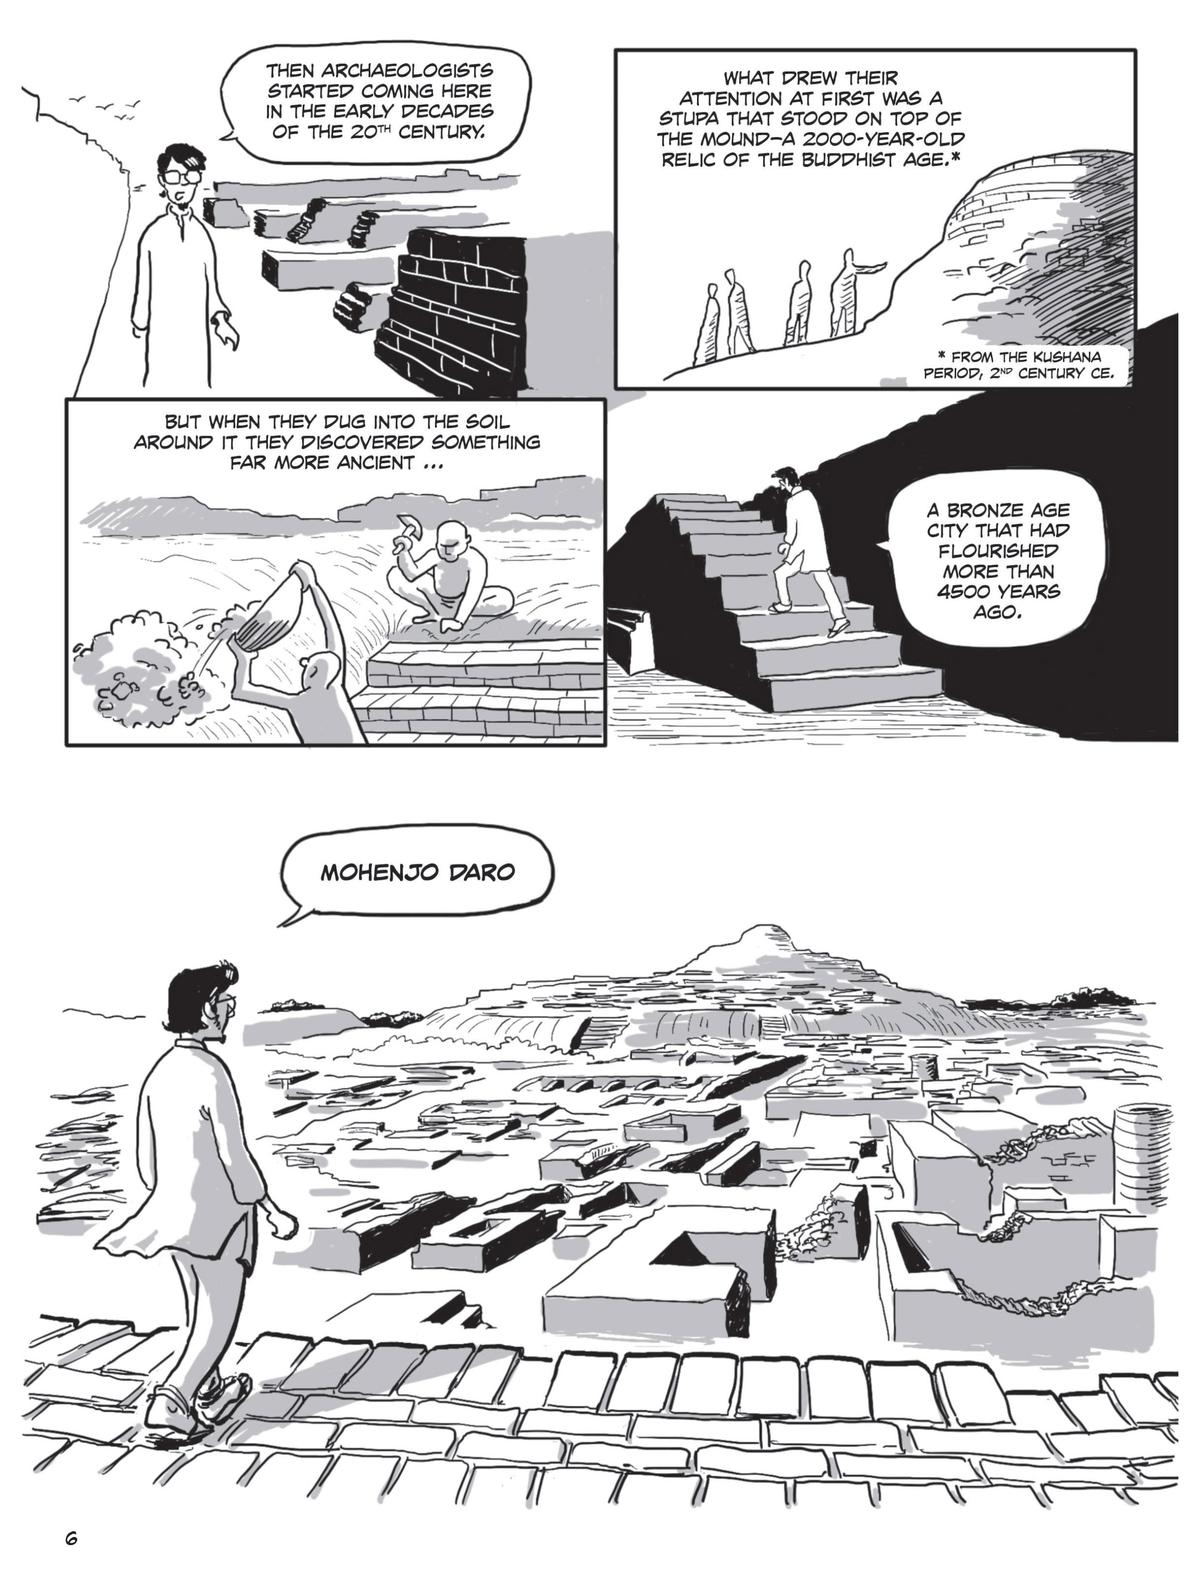 Pages from Nikhil Gulati graphic novel, The People of the Indus